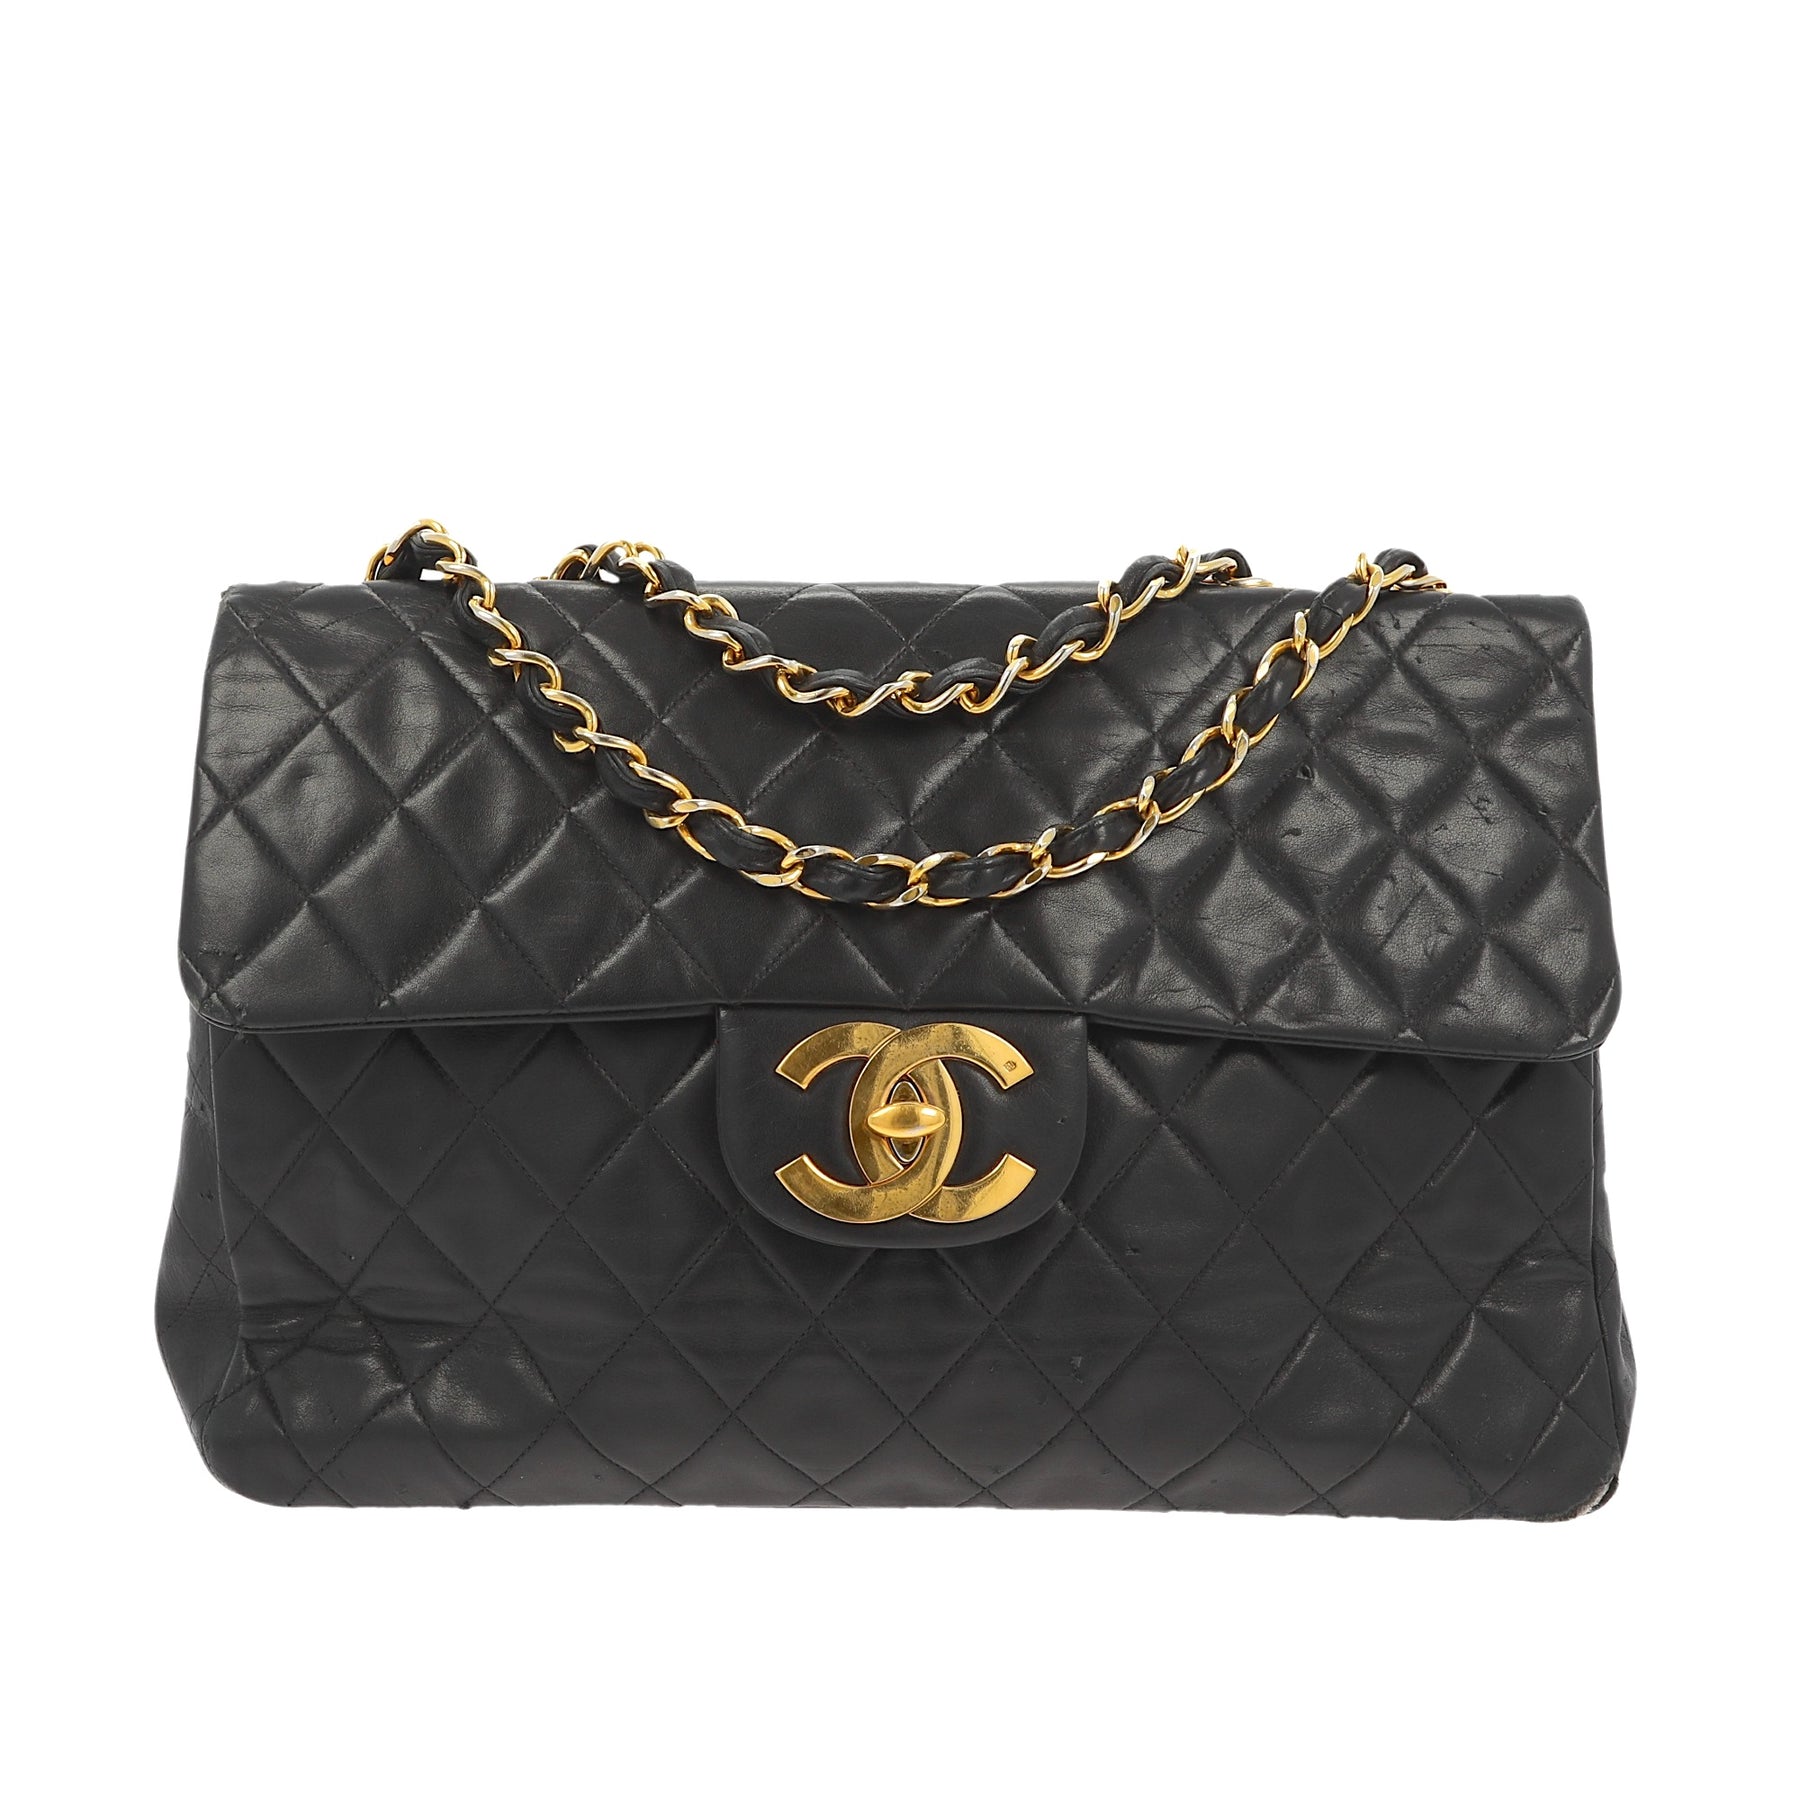 Timeless/classique leather handbag Chanel Black in Leather - 31445470